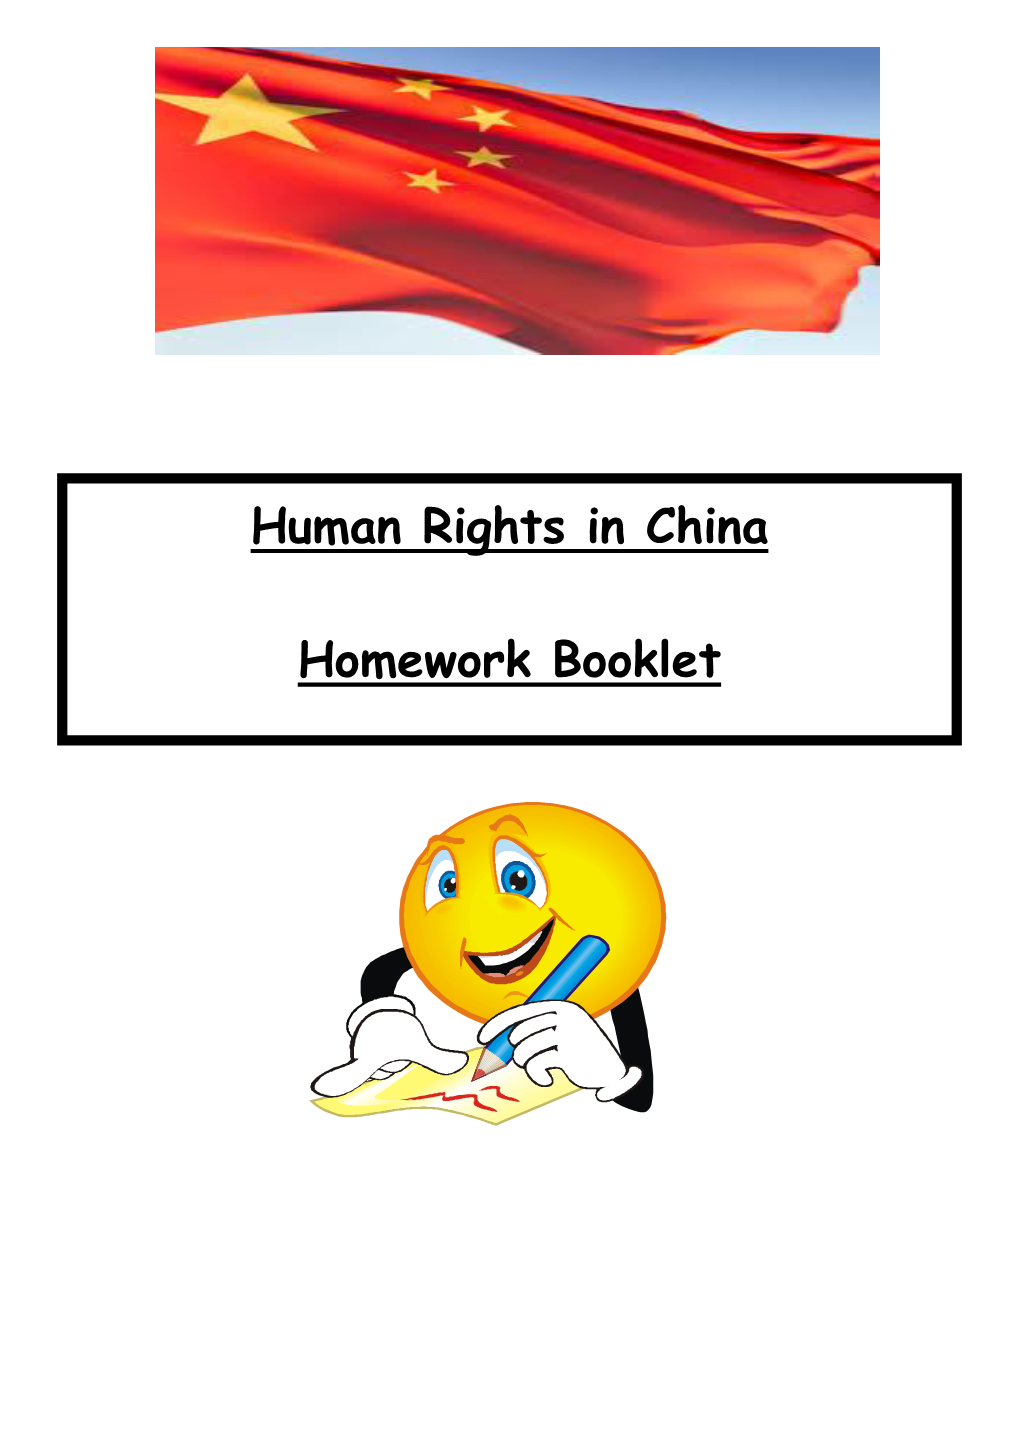 Human Rights in China Homework Booklet